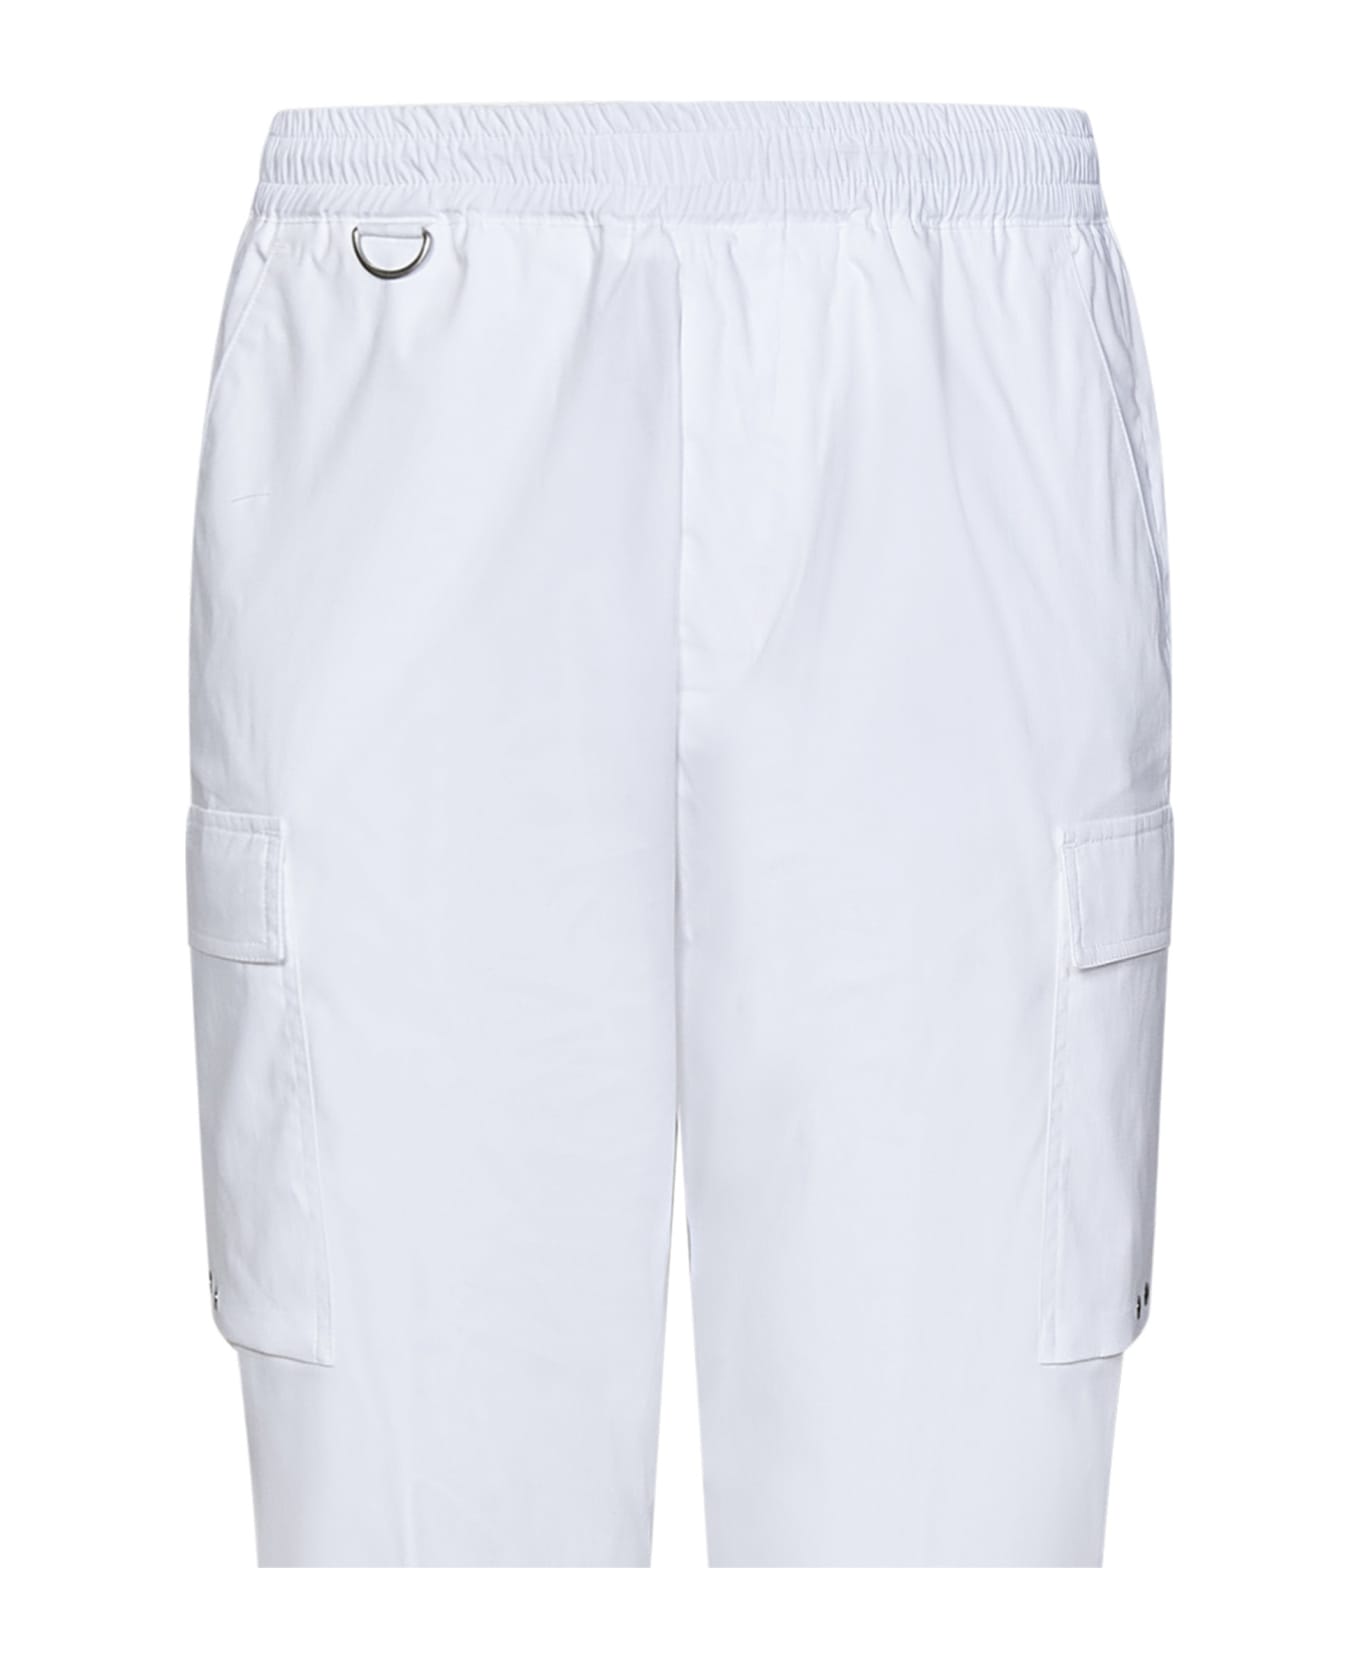 Low Brand Trousers - White